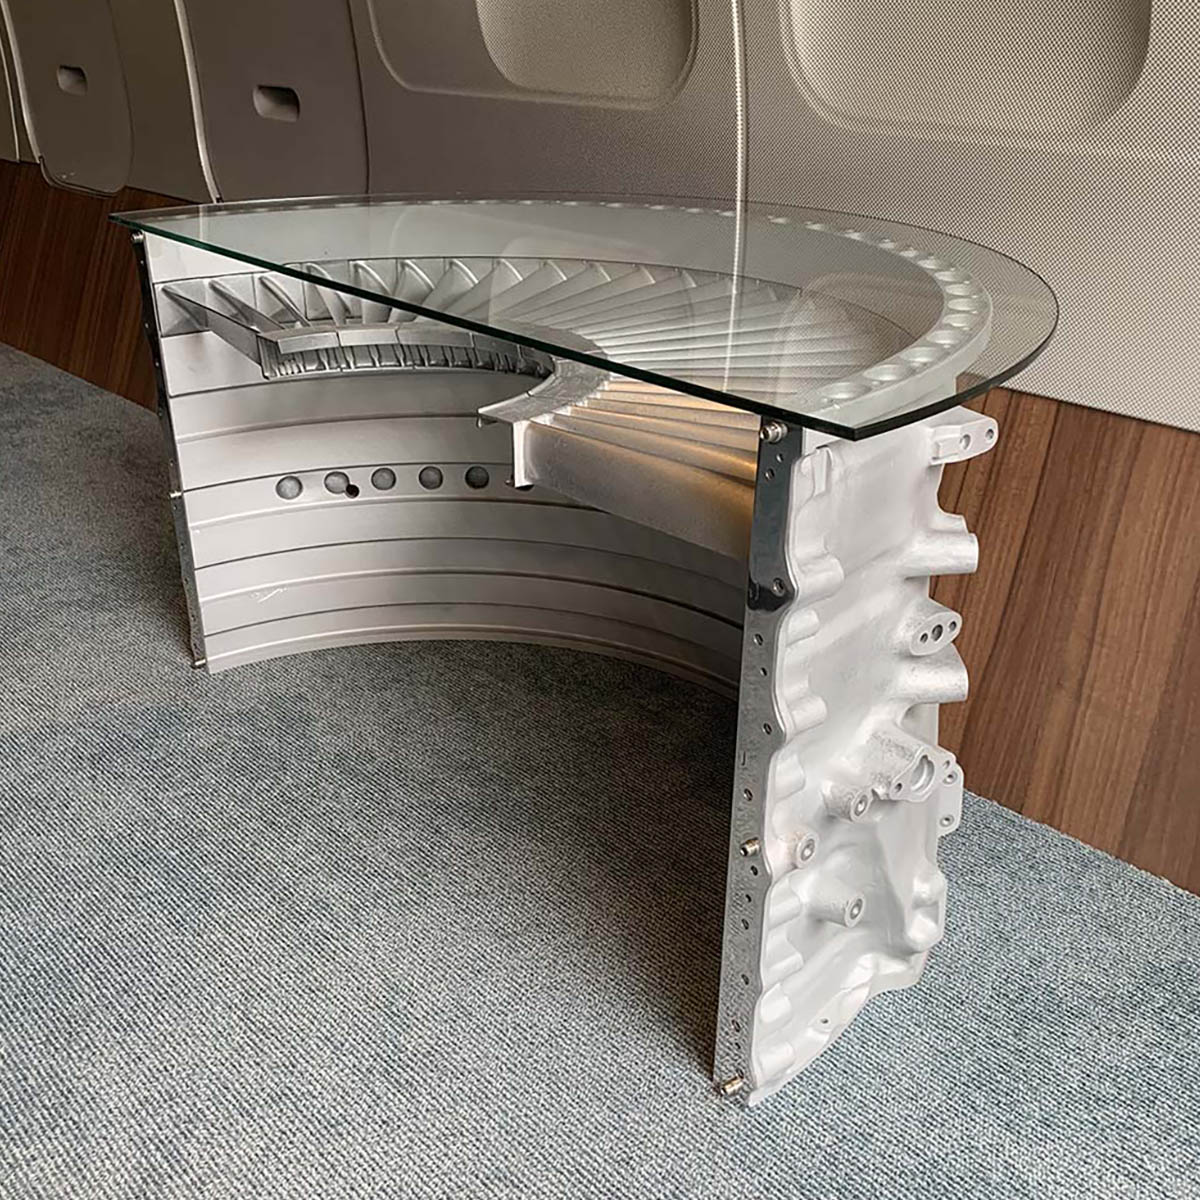 Rolls-Royce Conway 508 compressor table inside an aviation themed conference room.